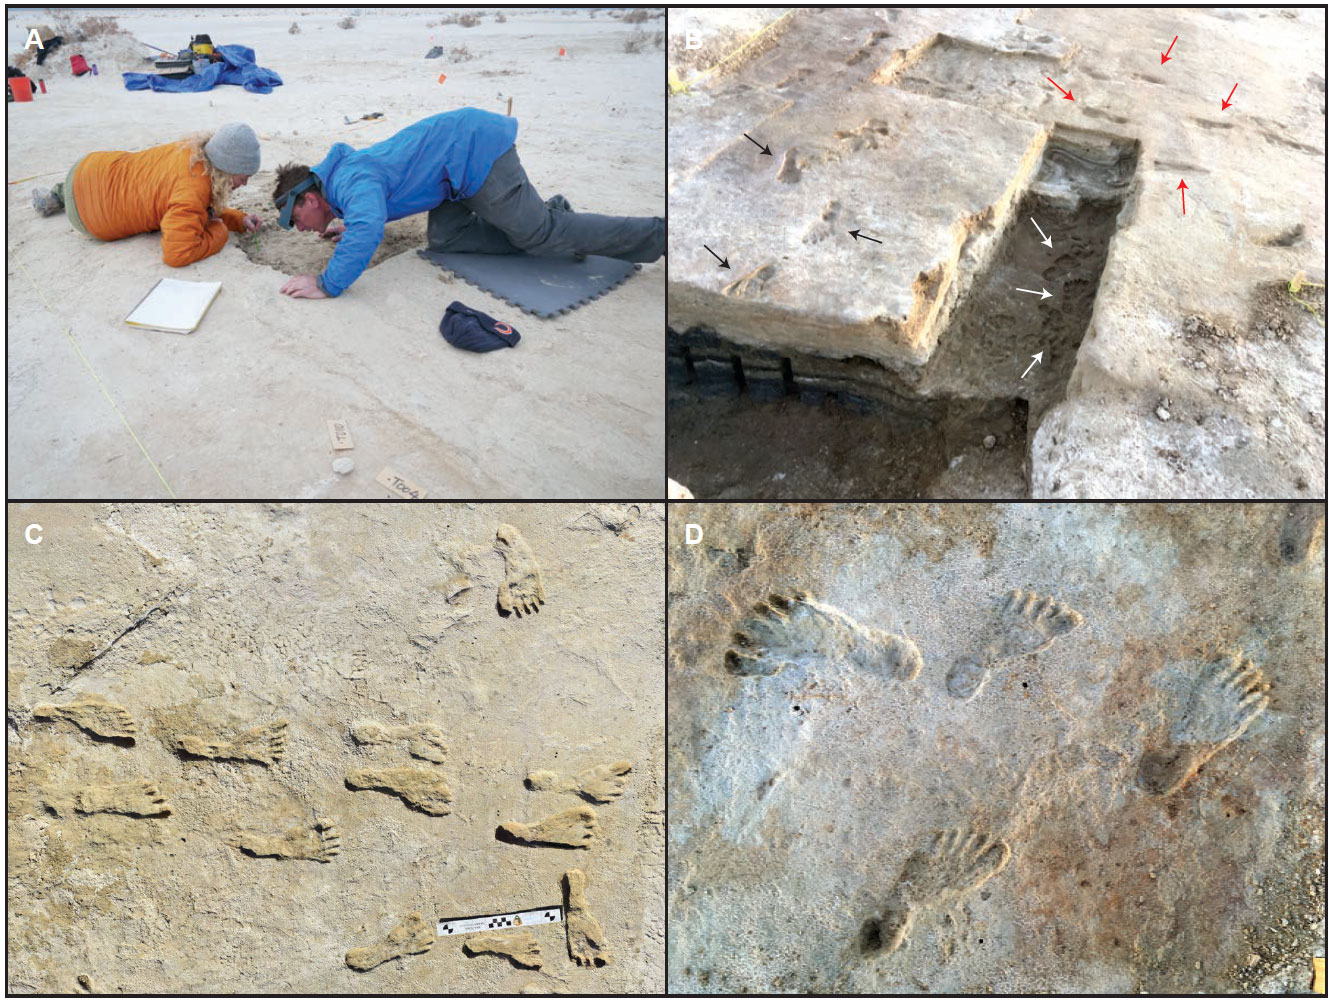 4-Panel image showing Pleistocene human tracks in White Sands, New Mexico. Panel 1: Scientists taking seed sample. Two people are resting on the ground near a shallow hole. There faces are close to the ground, as if they are looking at something. Panel 2: Whitish gypsum flats with several layers that preserve human footprints exposed. The oldest footprints are in a narrow rectangular trench while younger prints are at two higher levels. Arrows are used to indicate the prints. Panel 3: Picture of human footprints on flat ground. The footprints indicate that the humans were barefoot. Panel 4: Four human footprints on flat ground.